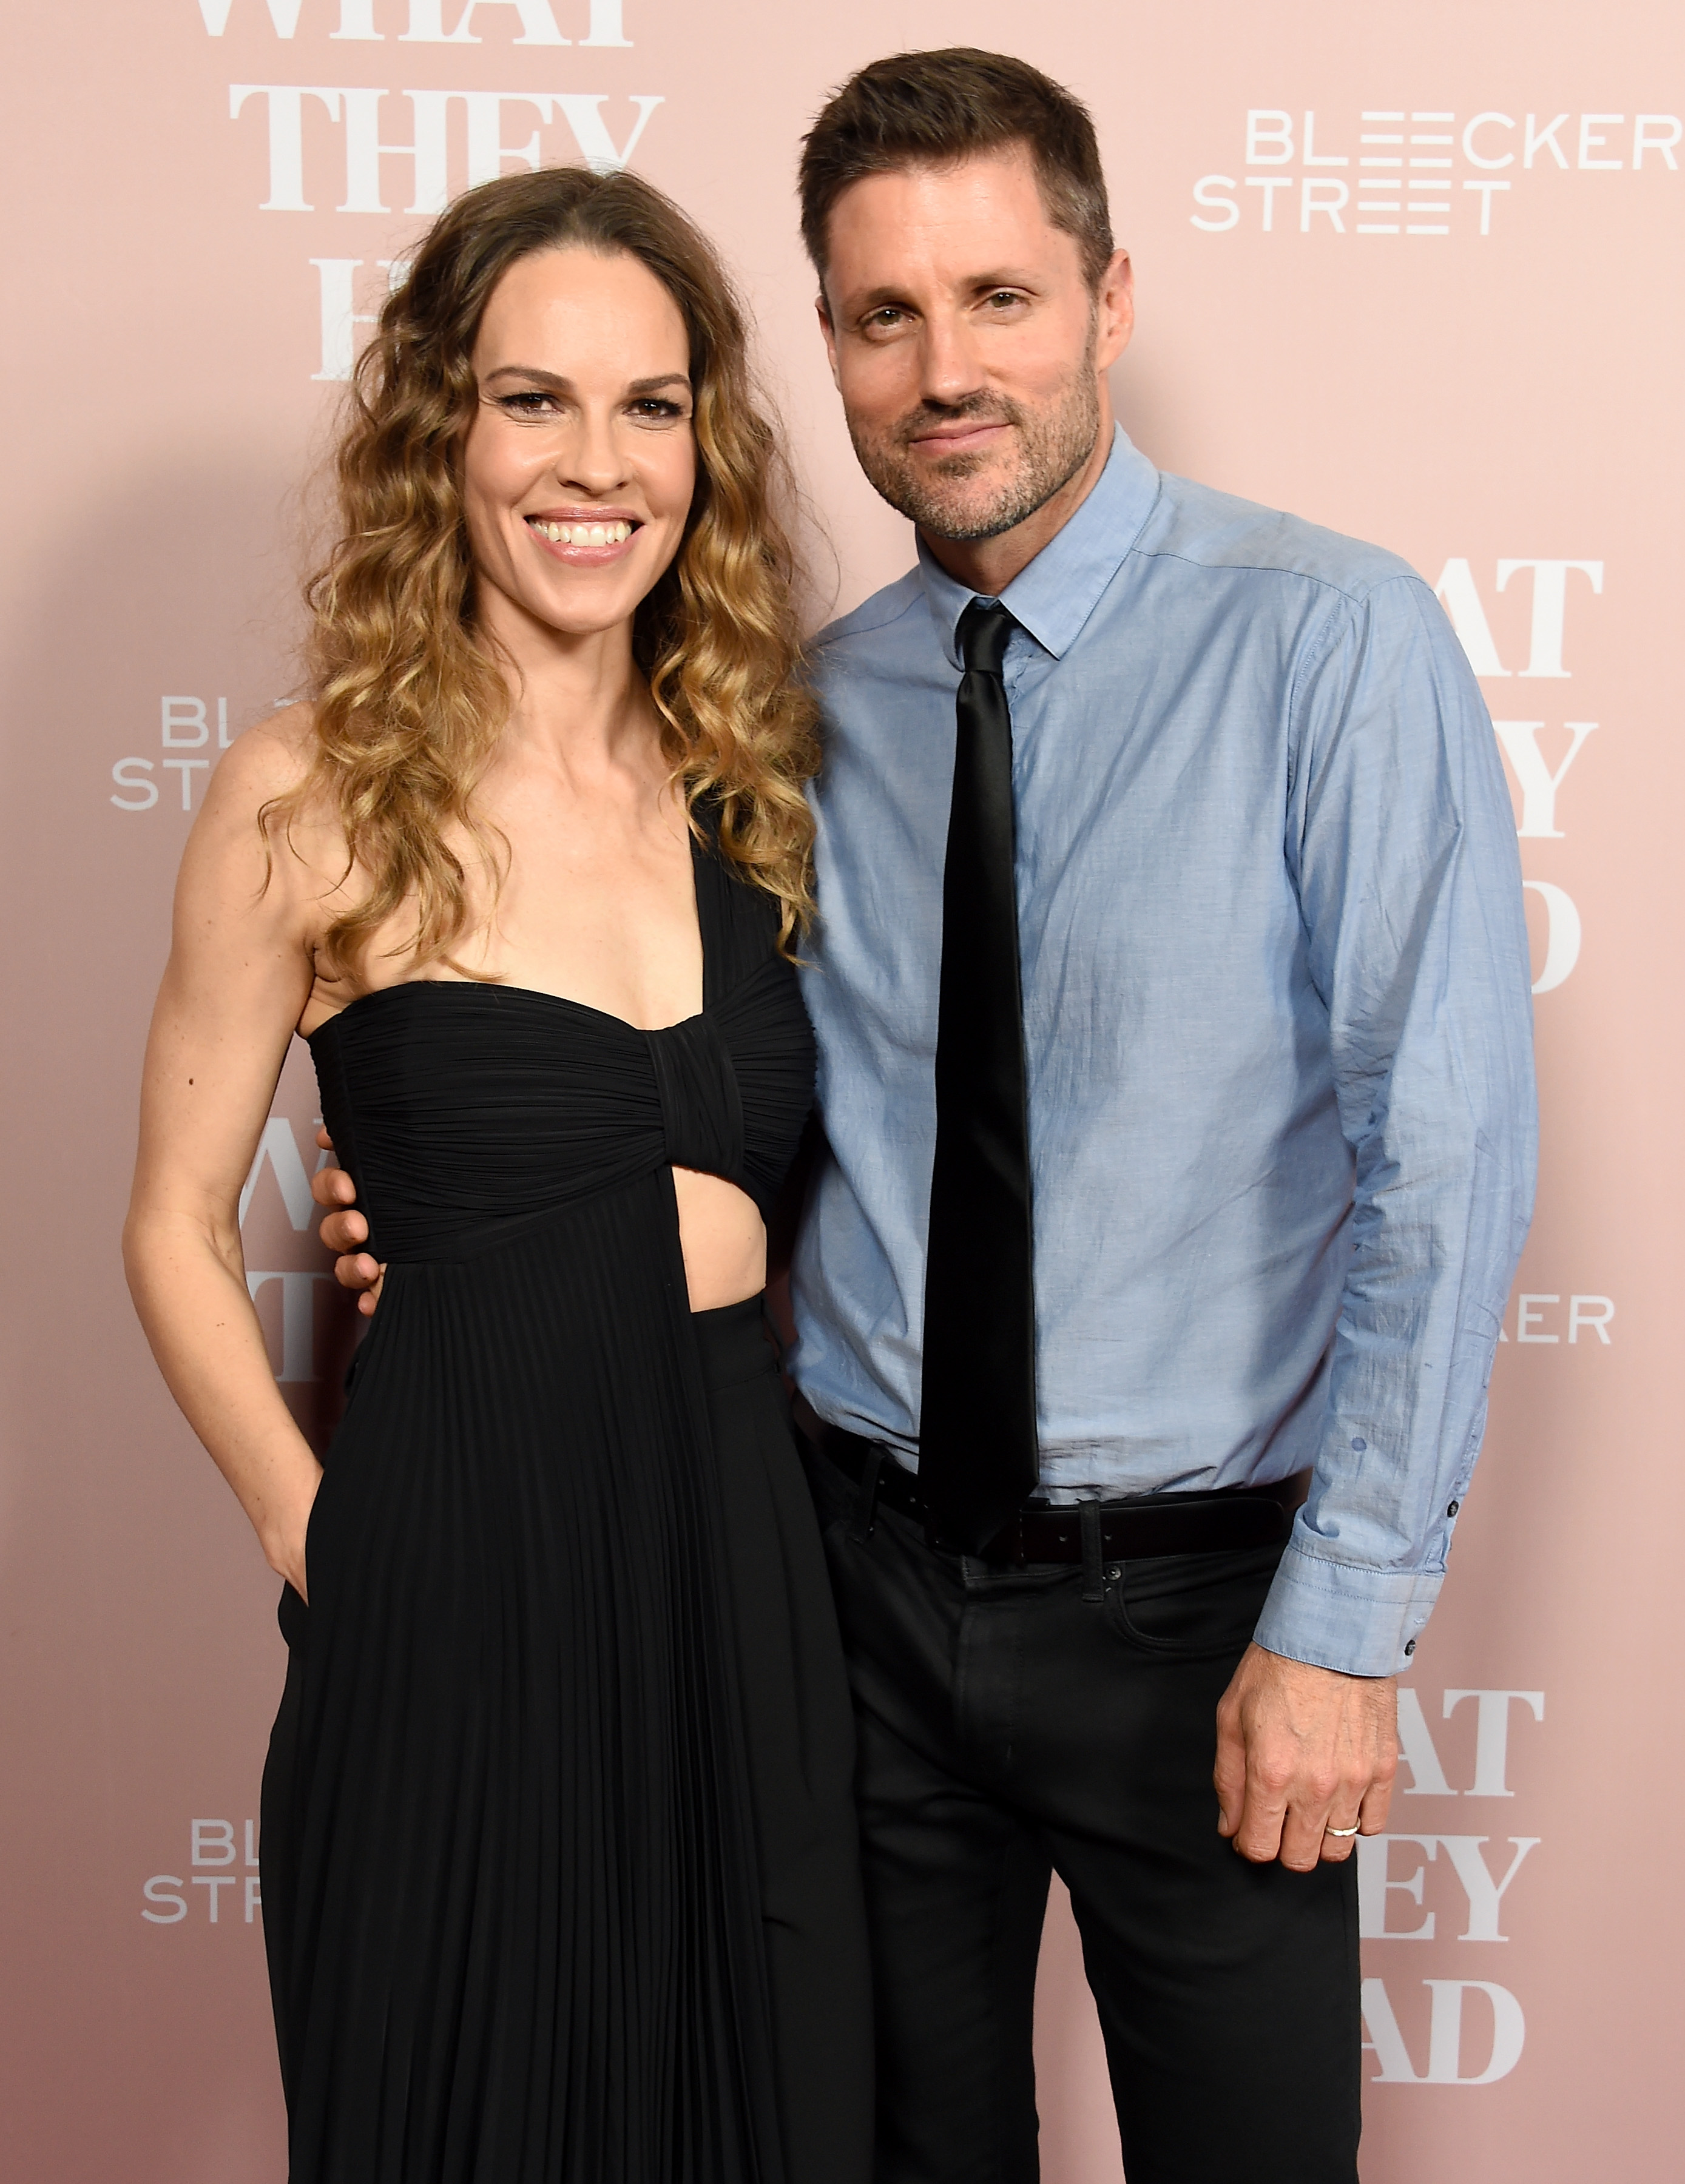 Hilary Swank and Philip Schneider at the Los Angeles Special Screening Of "What They Had" in 2018 | Source: Getty Images